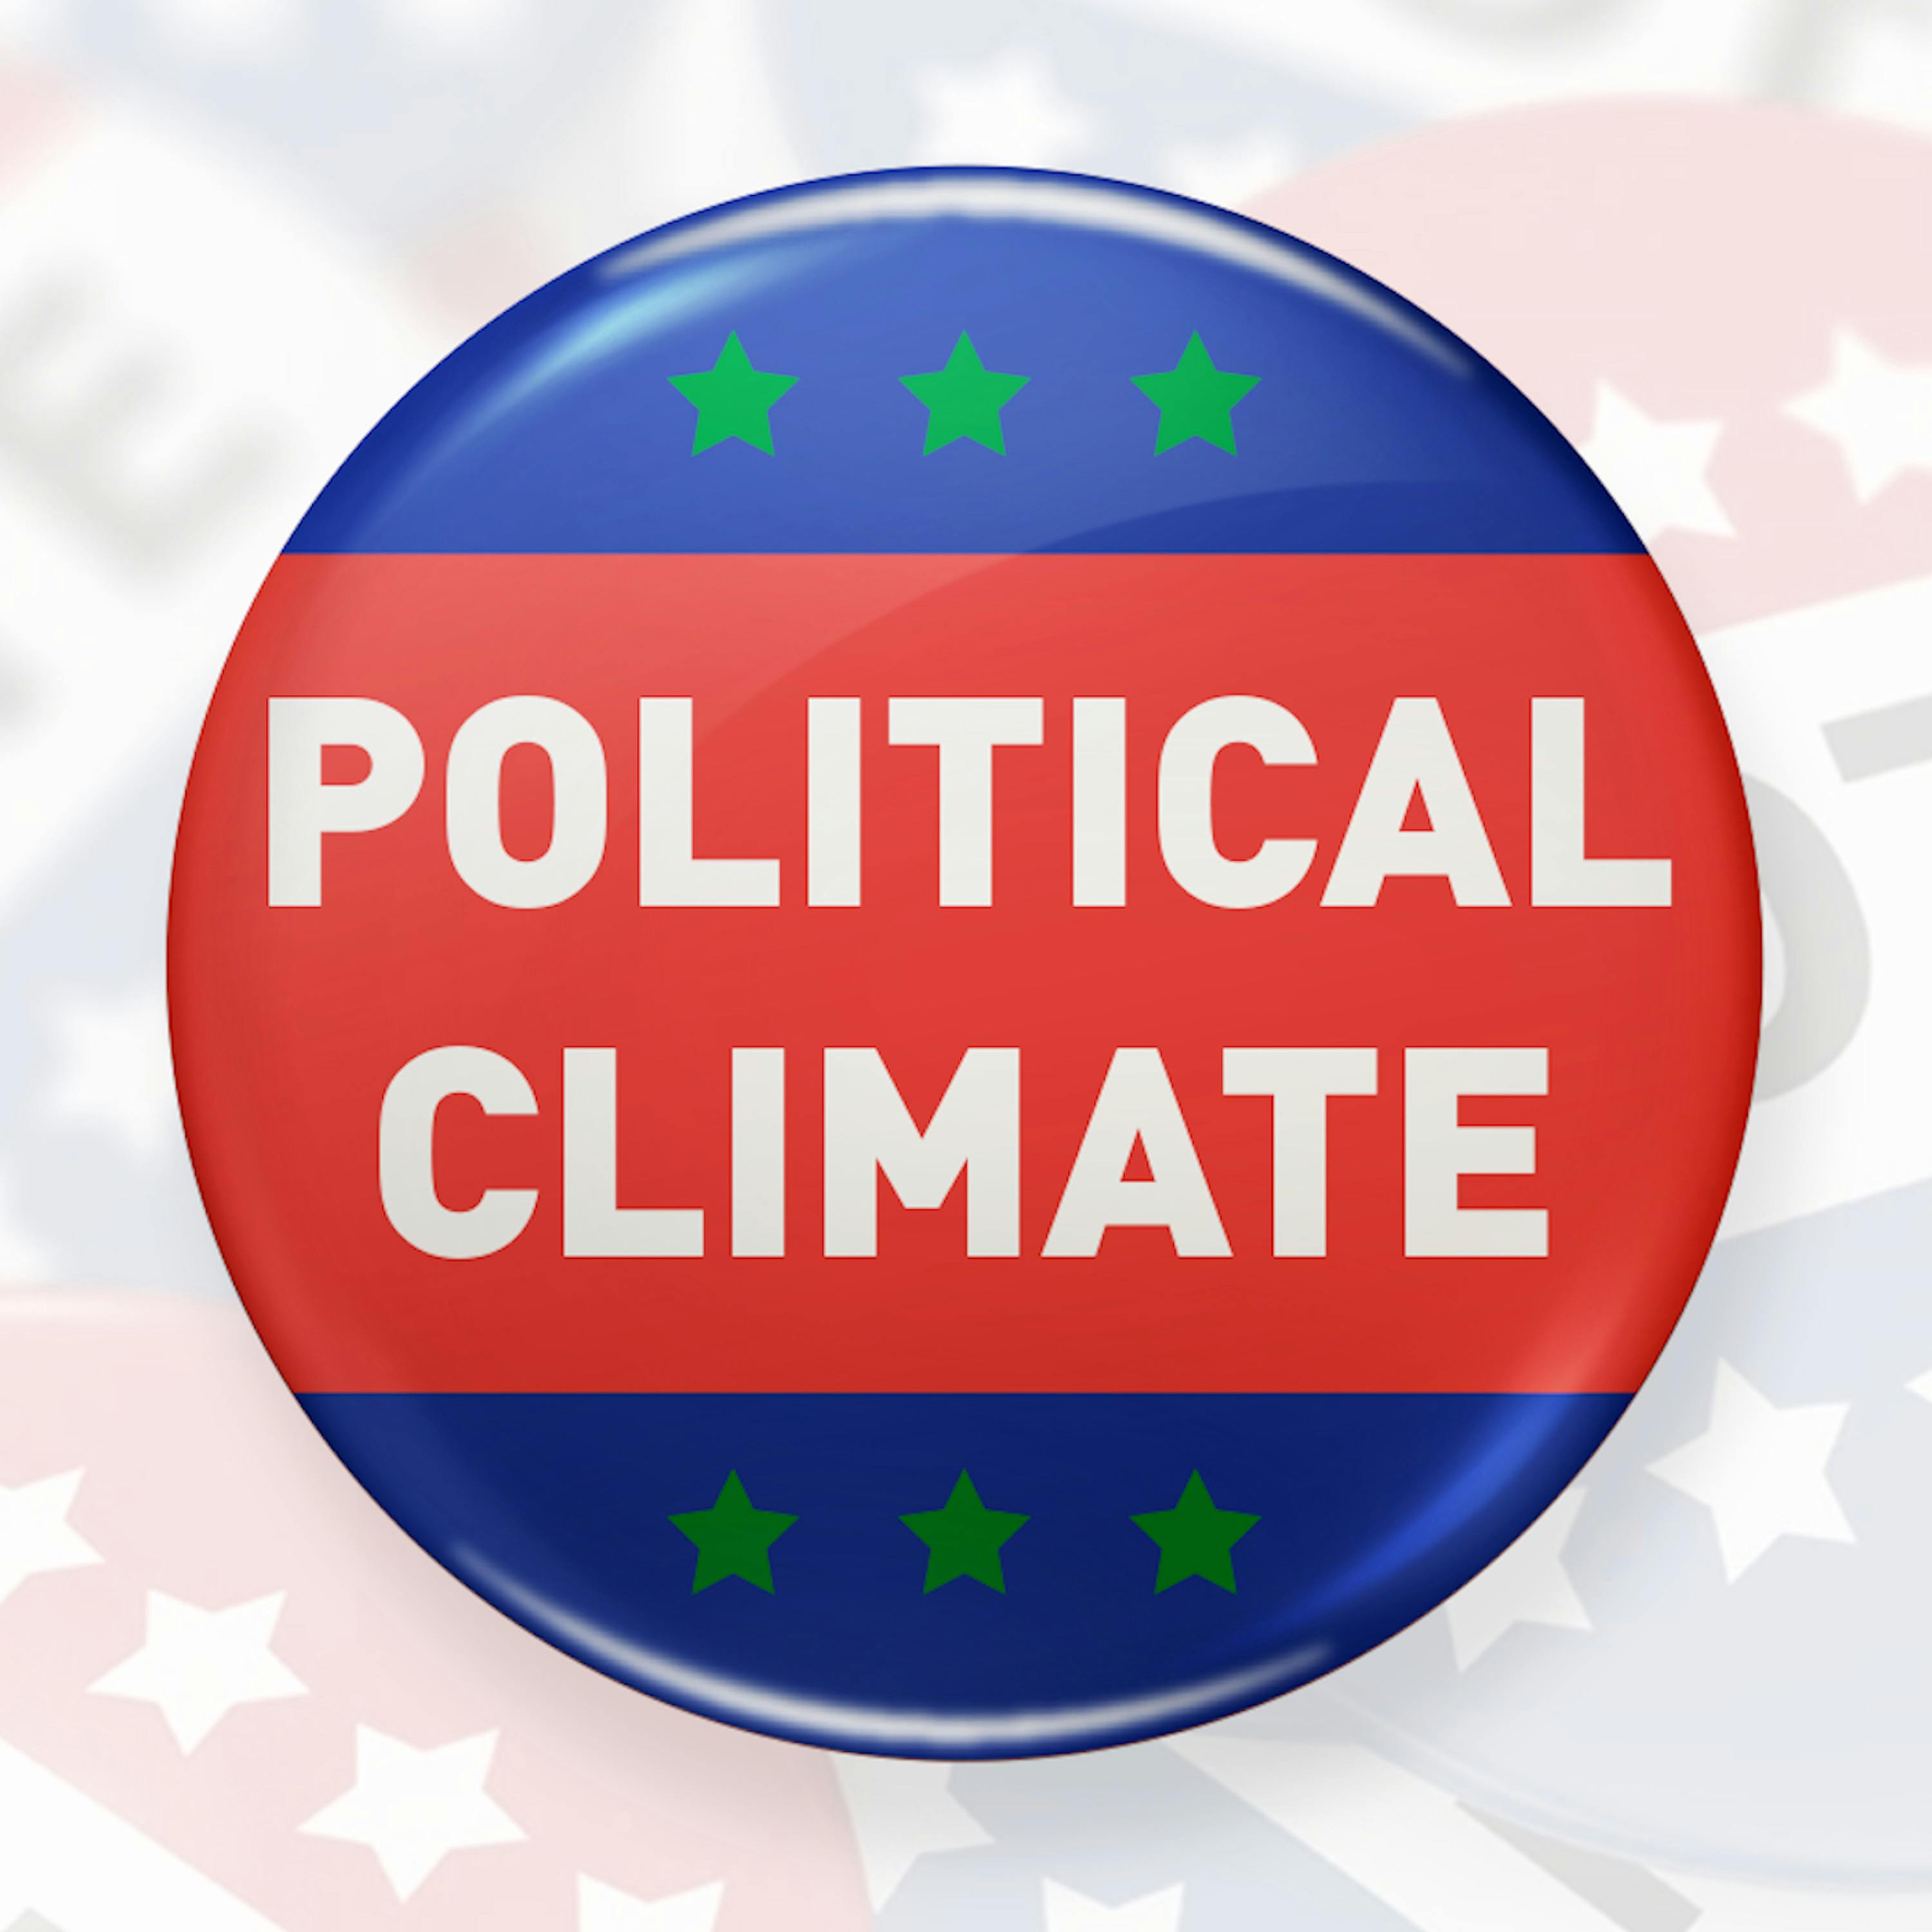 The Most Pivotal Years for Climate Policy